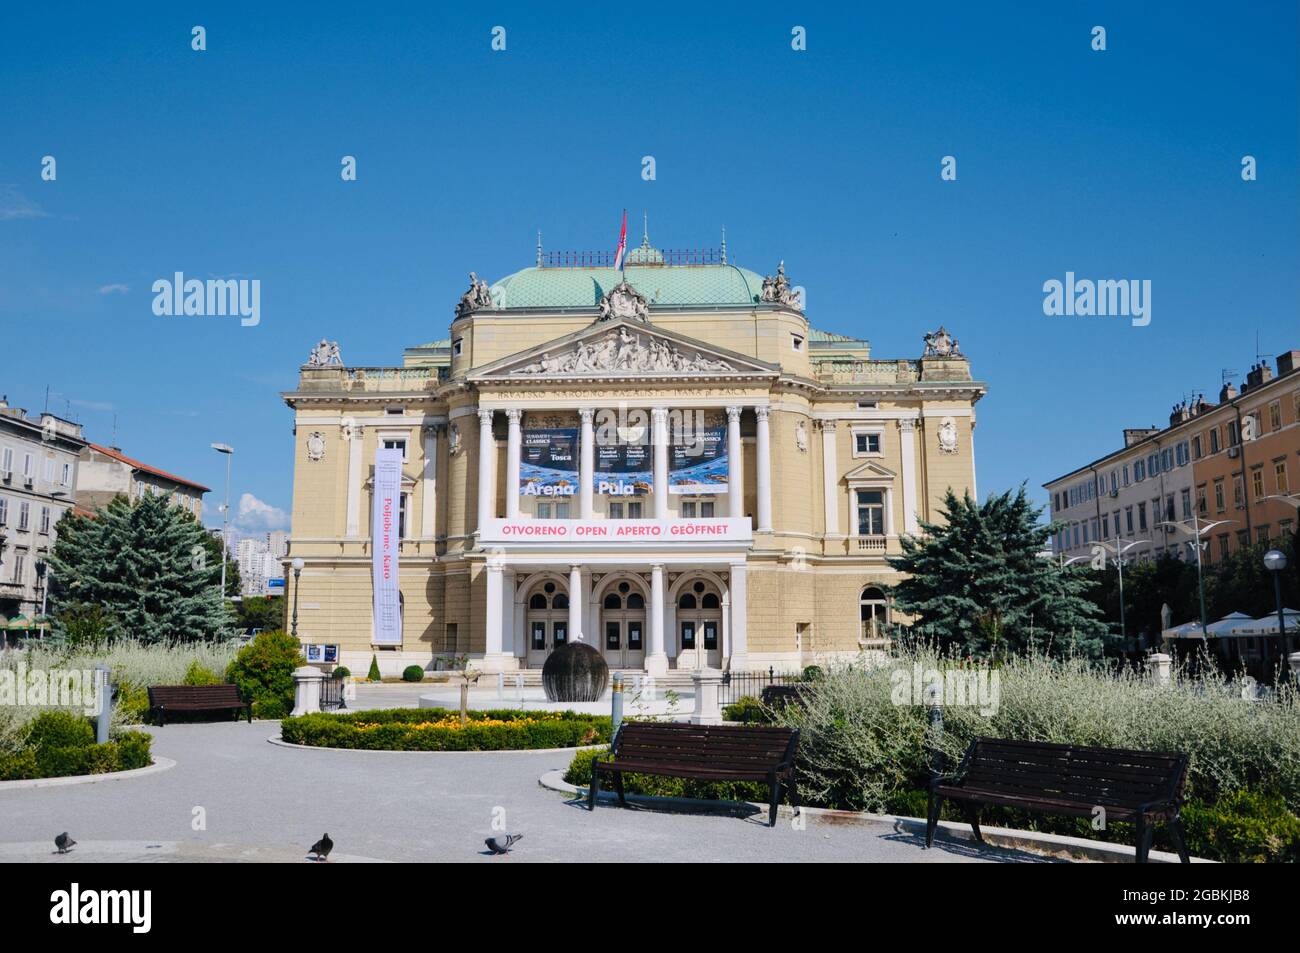 The Croatian National Theatre Ivan pl. Zajc in Rijeka, commonlyreferred to as HNK Zajc, is a theatre, opera and ballet house located in Rijeka. Stock Photo